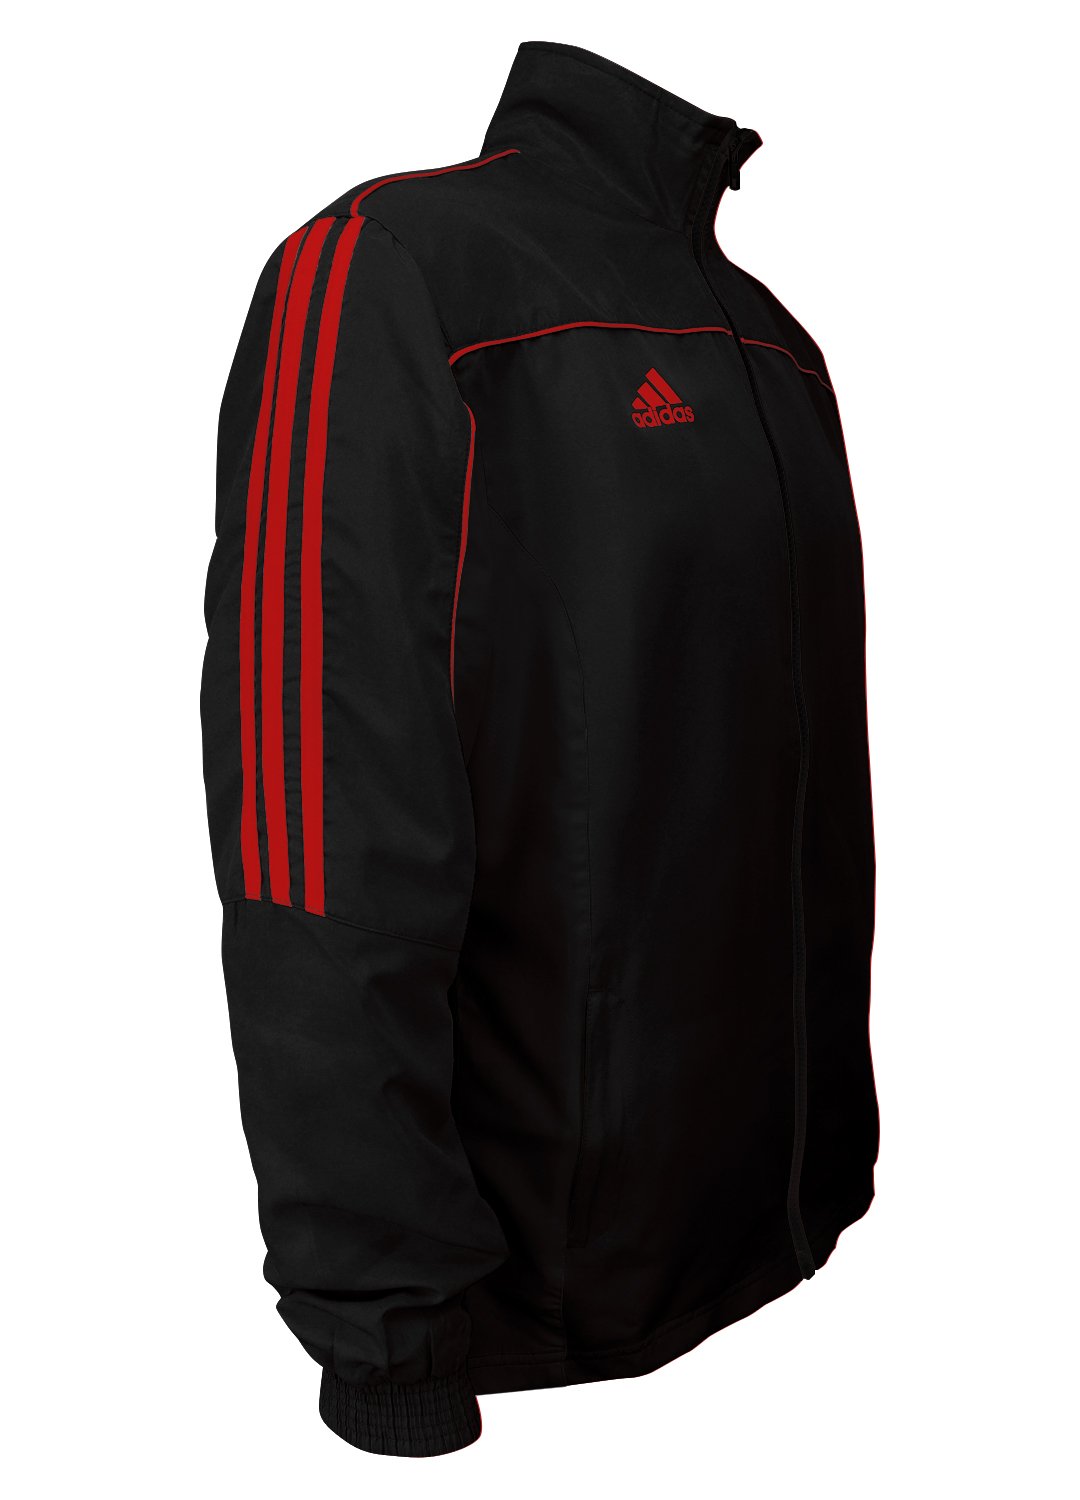 adidas Martial Arts 3-Stripes Light Tracksuit 100% Polyester Long Sleeve Jacket – Black/Red